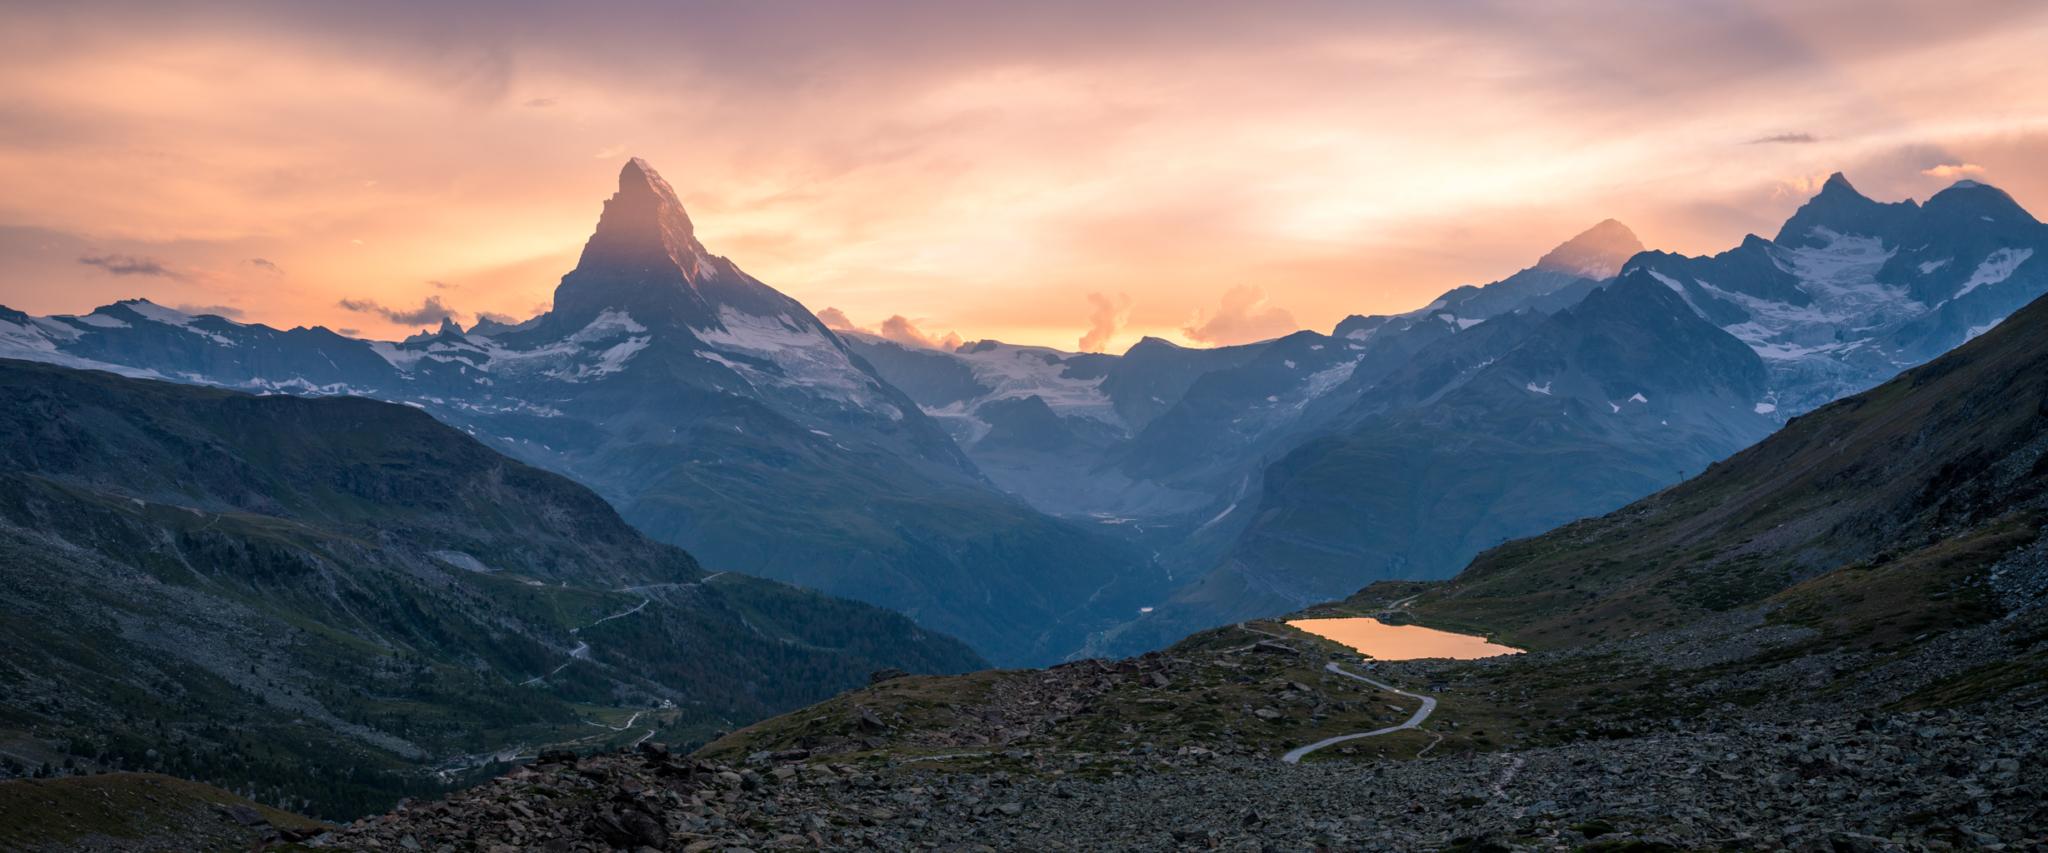 Landscape photograph of Swiss Alps with Matterhorn and Stellisee at sunset, Switzerland. Buy a canvas, framed or acrylic fine art print.